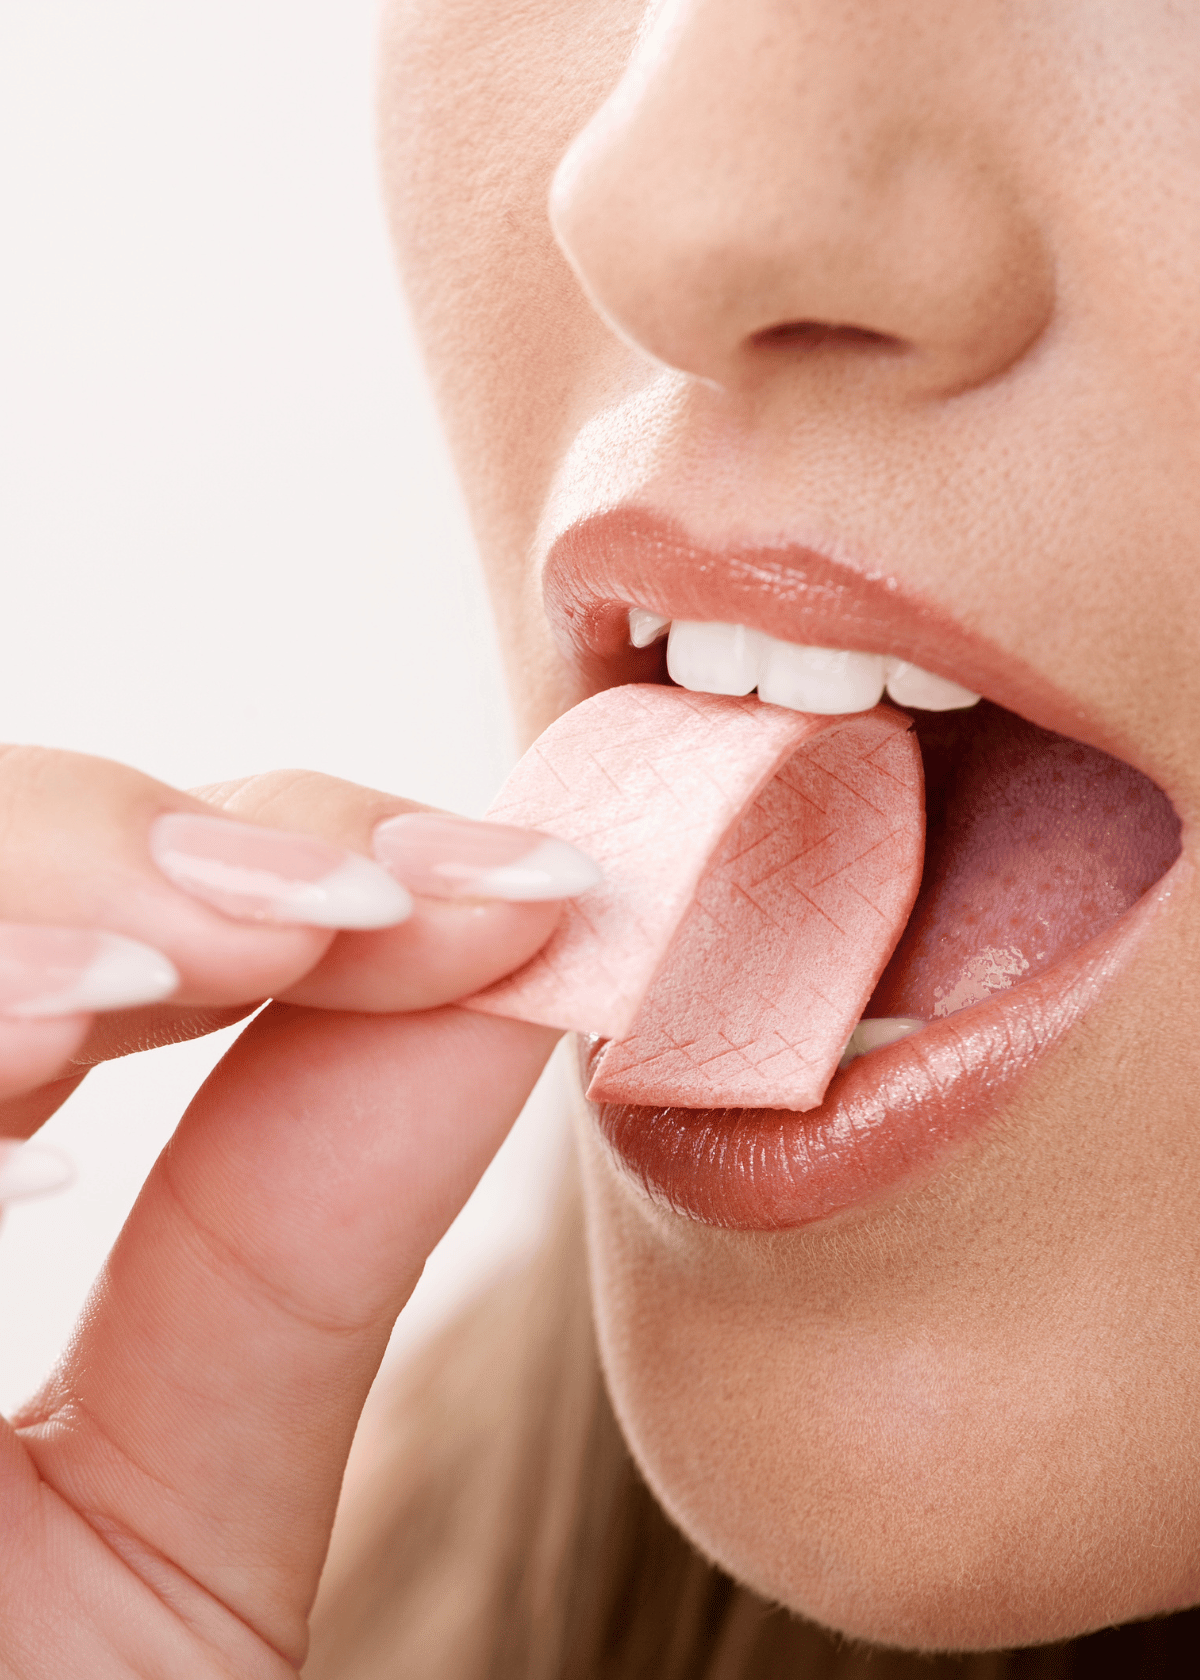 Does Chewing Gum Break your Intermittent Fast if it's Sugarfree?